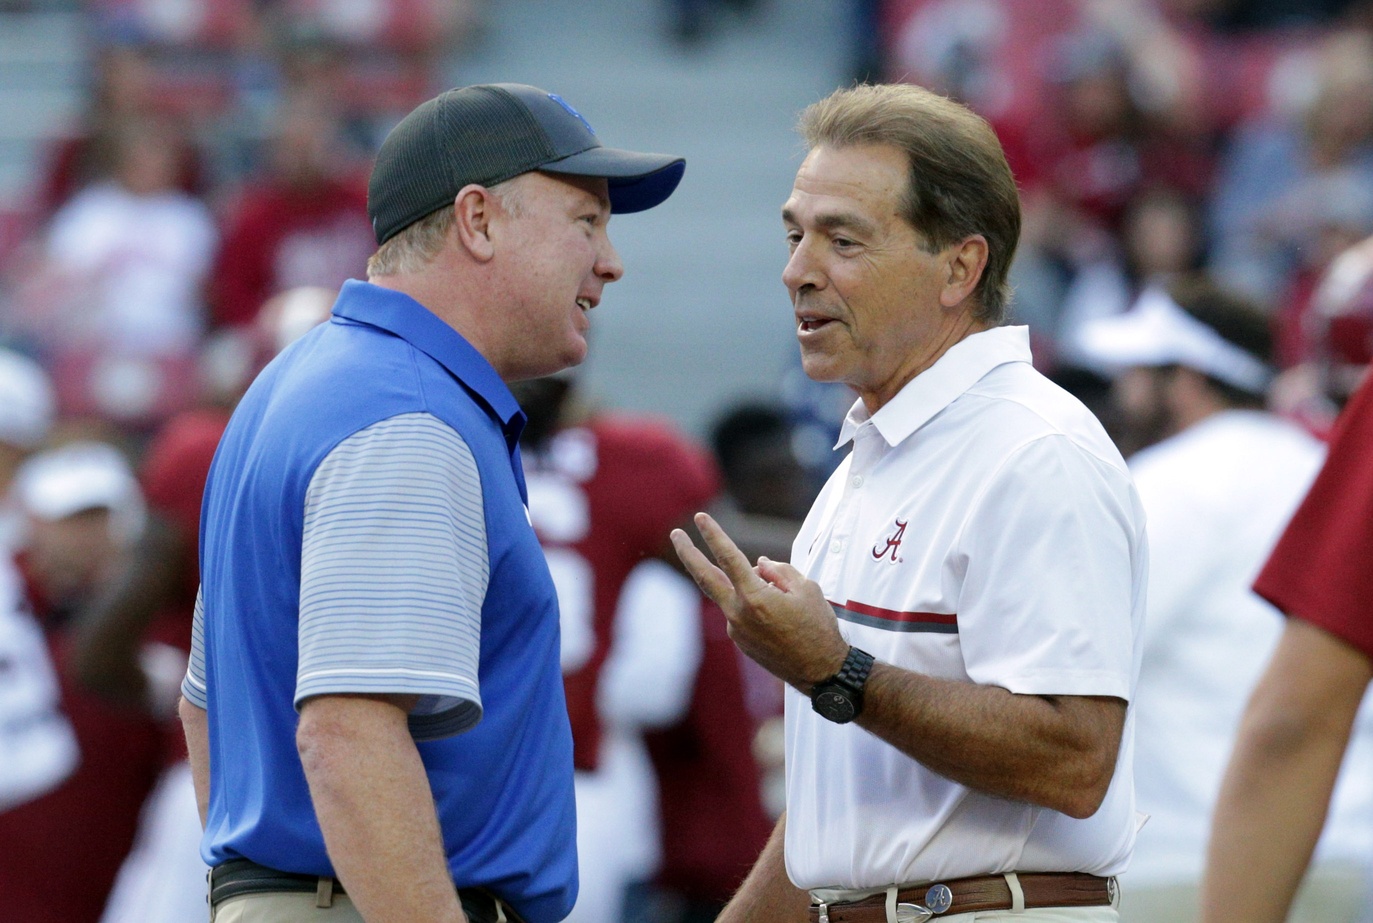 Oct 1, 2016; Tuscaloosa, AL, USA; Kentucky Wildcats head coach Mark Stoops and Alabama Crimson Tide head coach Nick Saban prior to the game at Bryant-Denny Stadium. Mandatory Credit: Marvin Gentry-USA TODAY Sports